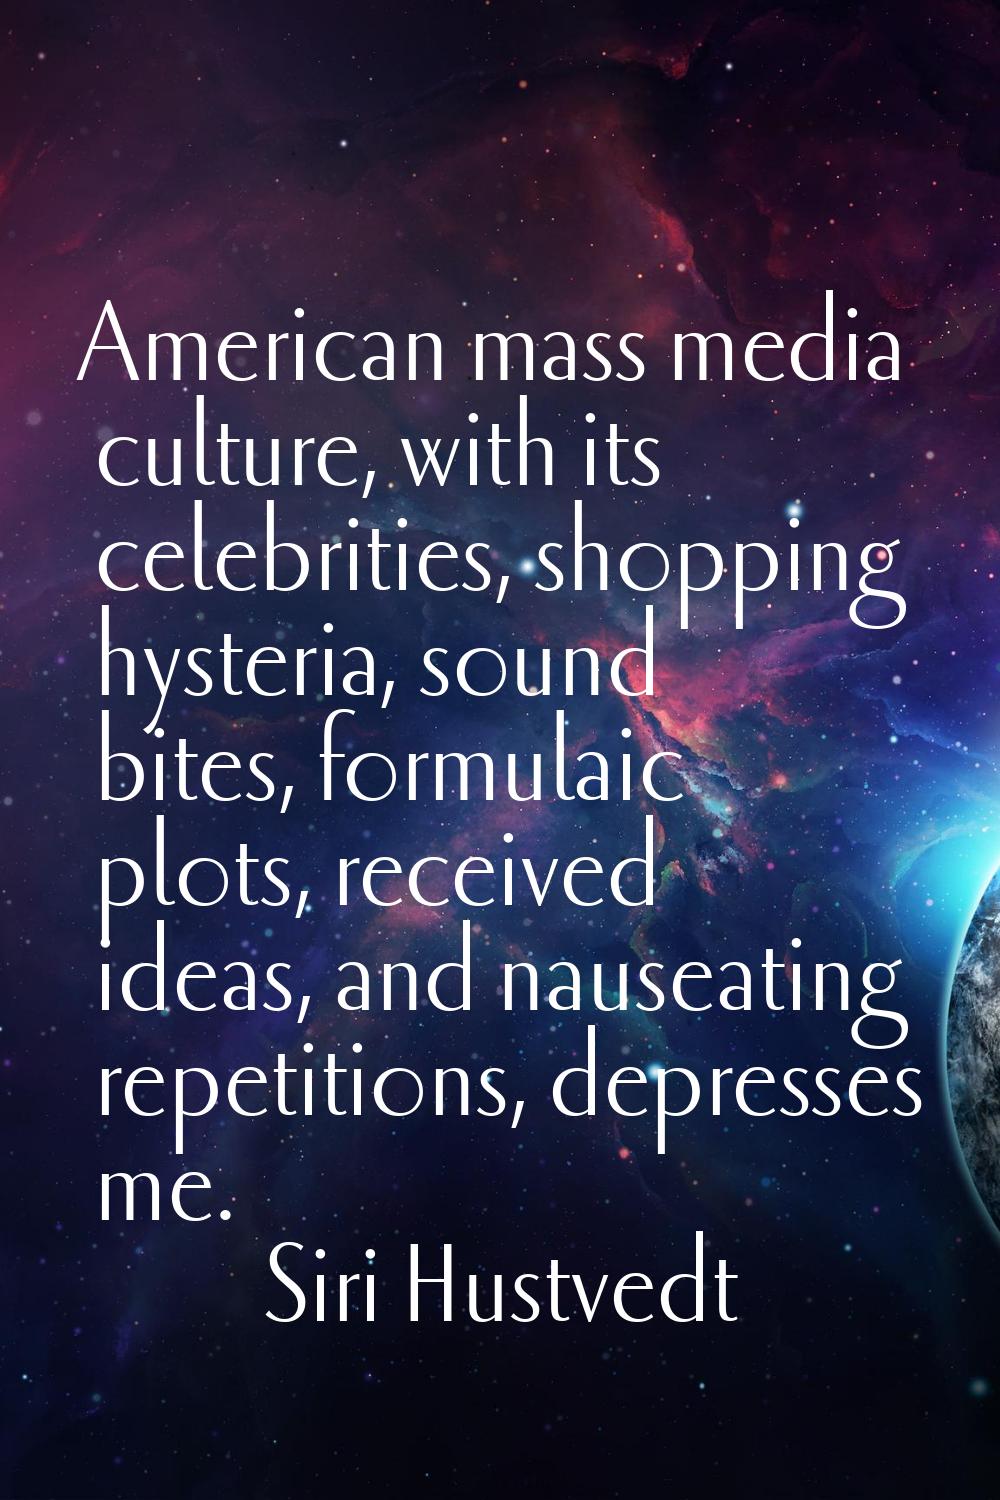 American mass media culture, with its celebrities, shopping hysteria, sound bites, formulaic plots,